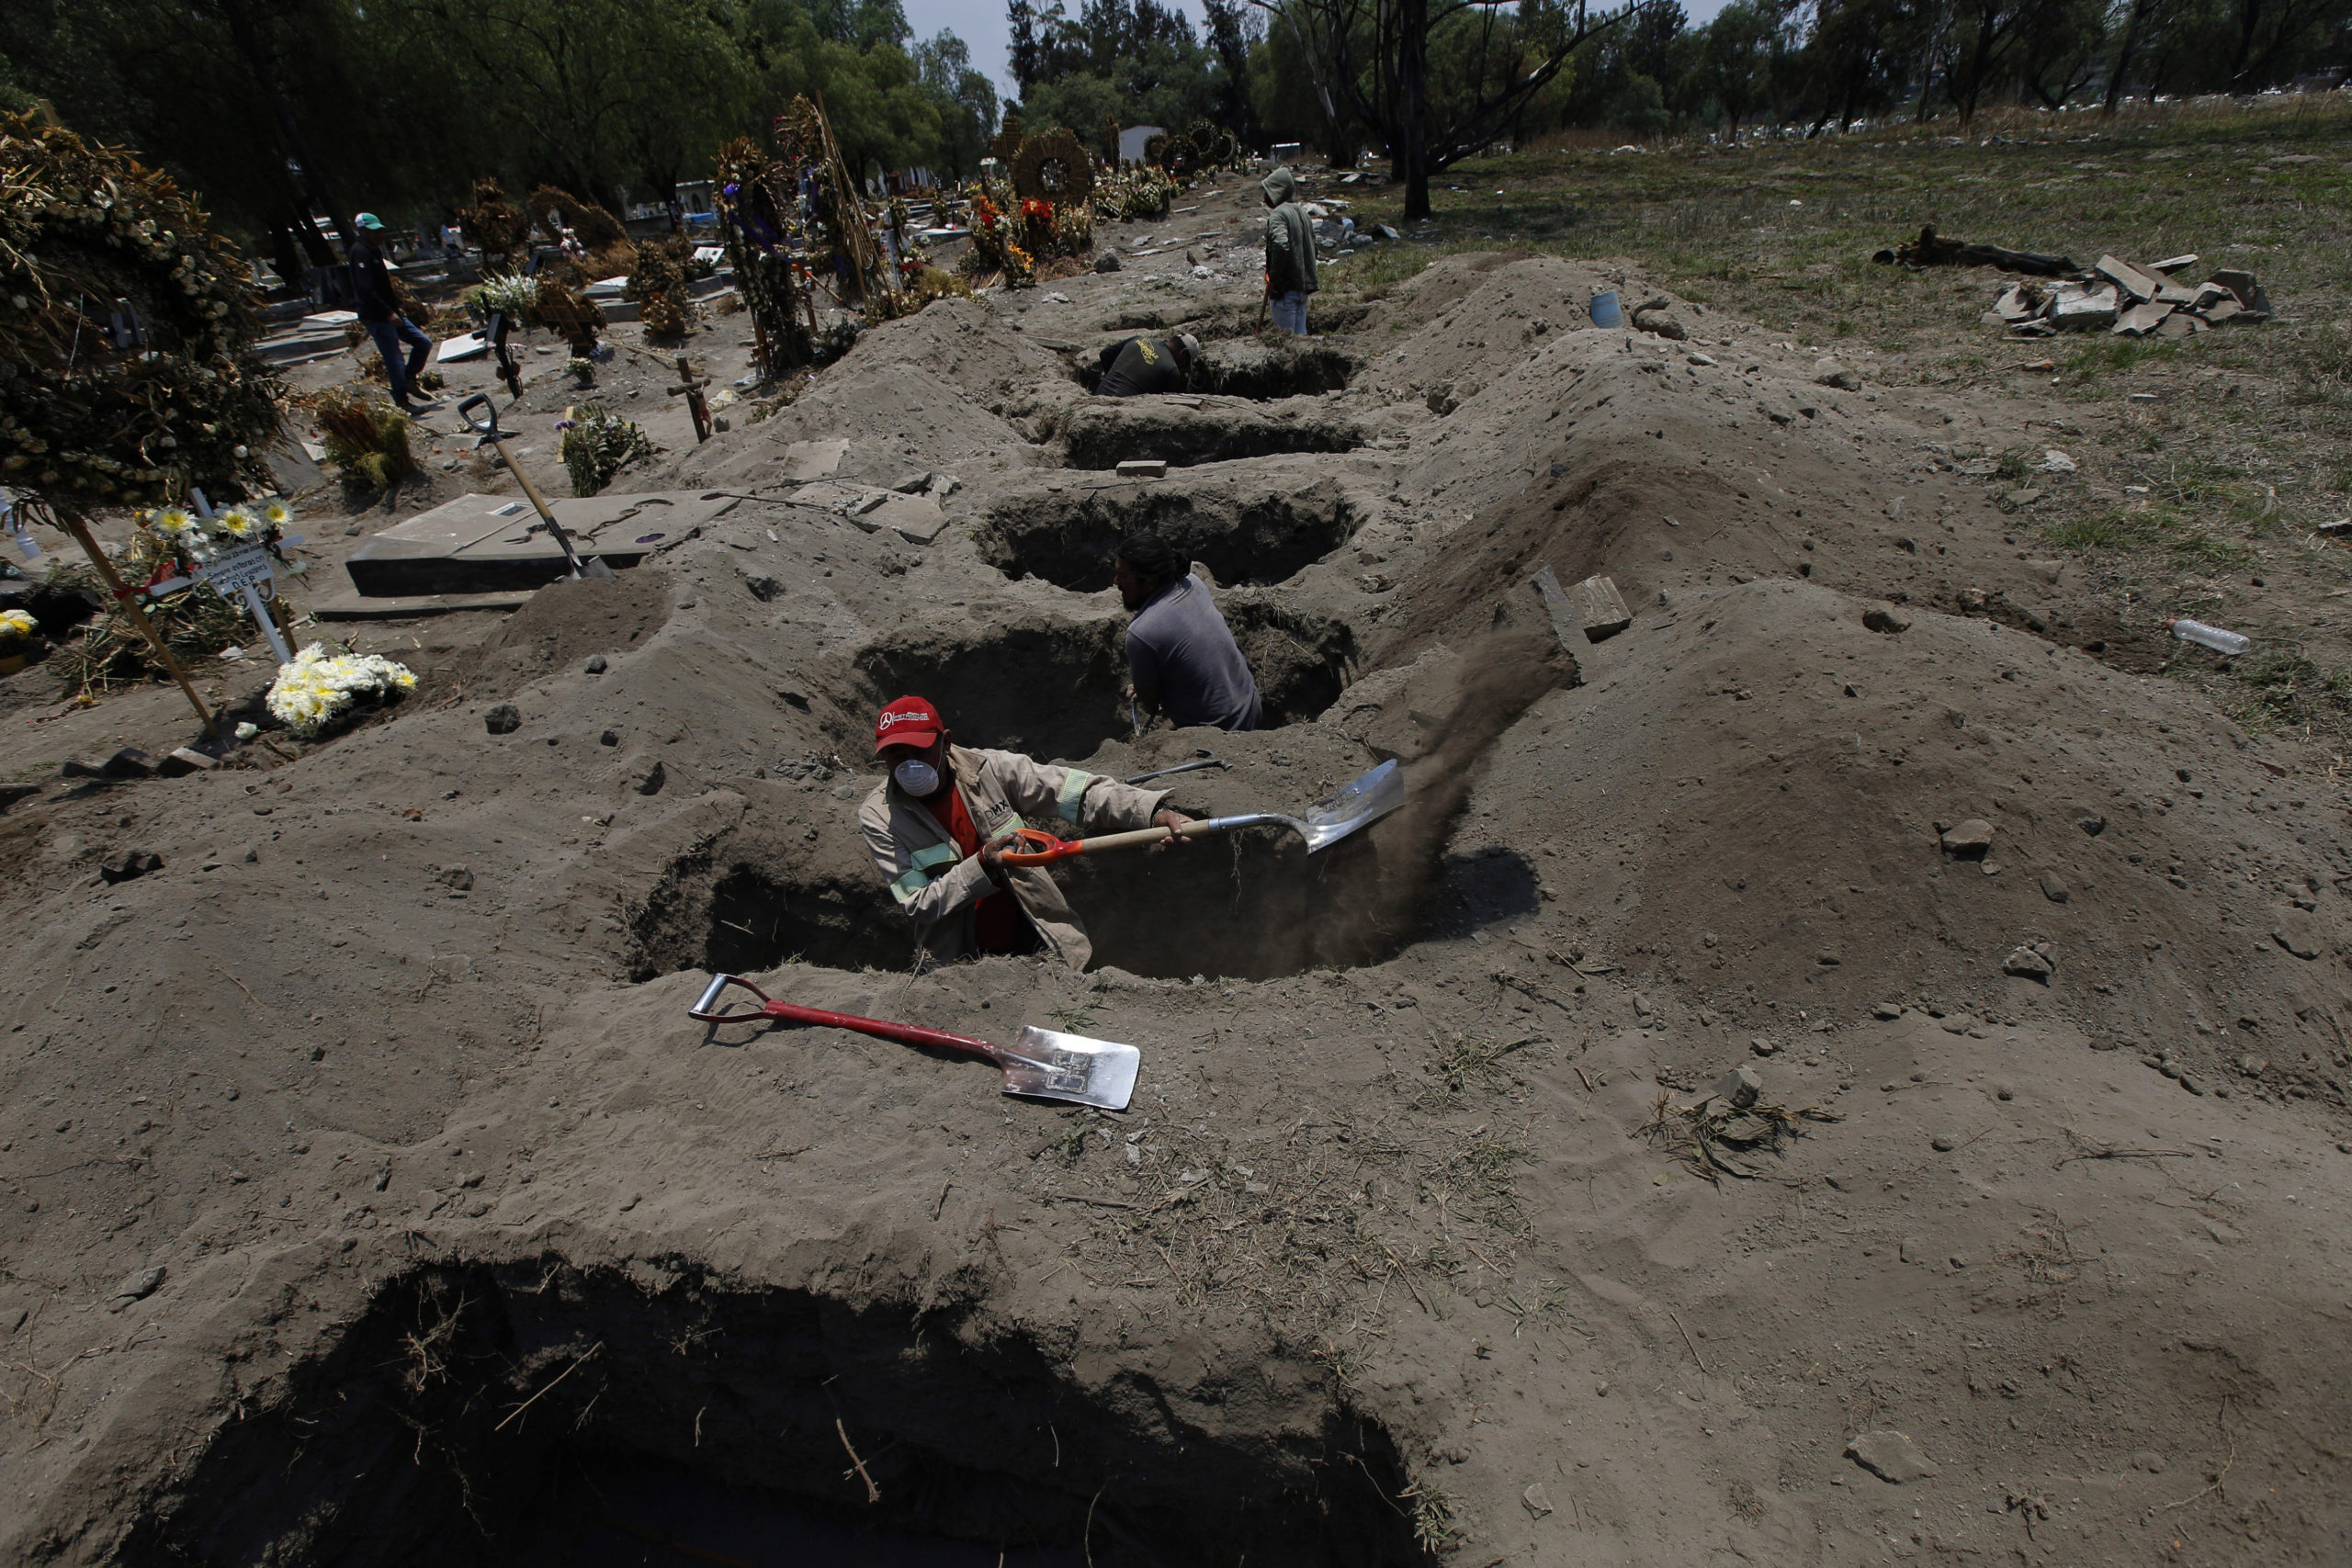 Melvin Sanaurio, front, digs a grave at the San Lorenzo Tezonco Iztapalapa cemetery in Mexico City, Tuesday, June 2, 2020, amid the new coronavirus pandemic. "It takes me more than an hour to dig one grave," Sanaurio said. (AP Photo/Marco Ugarte)